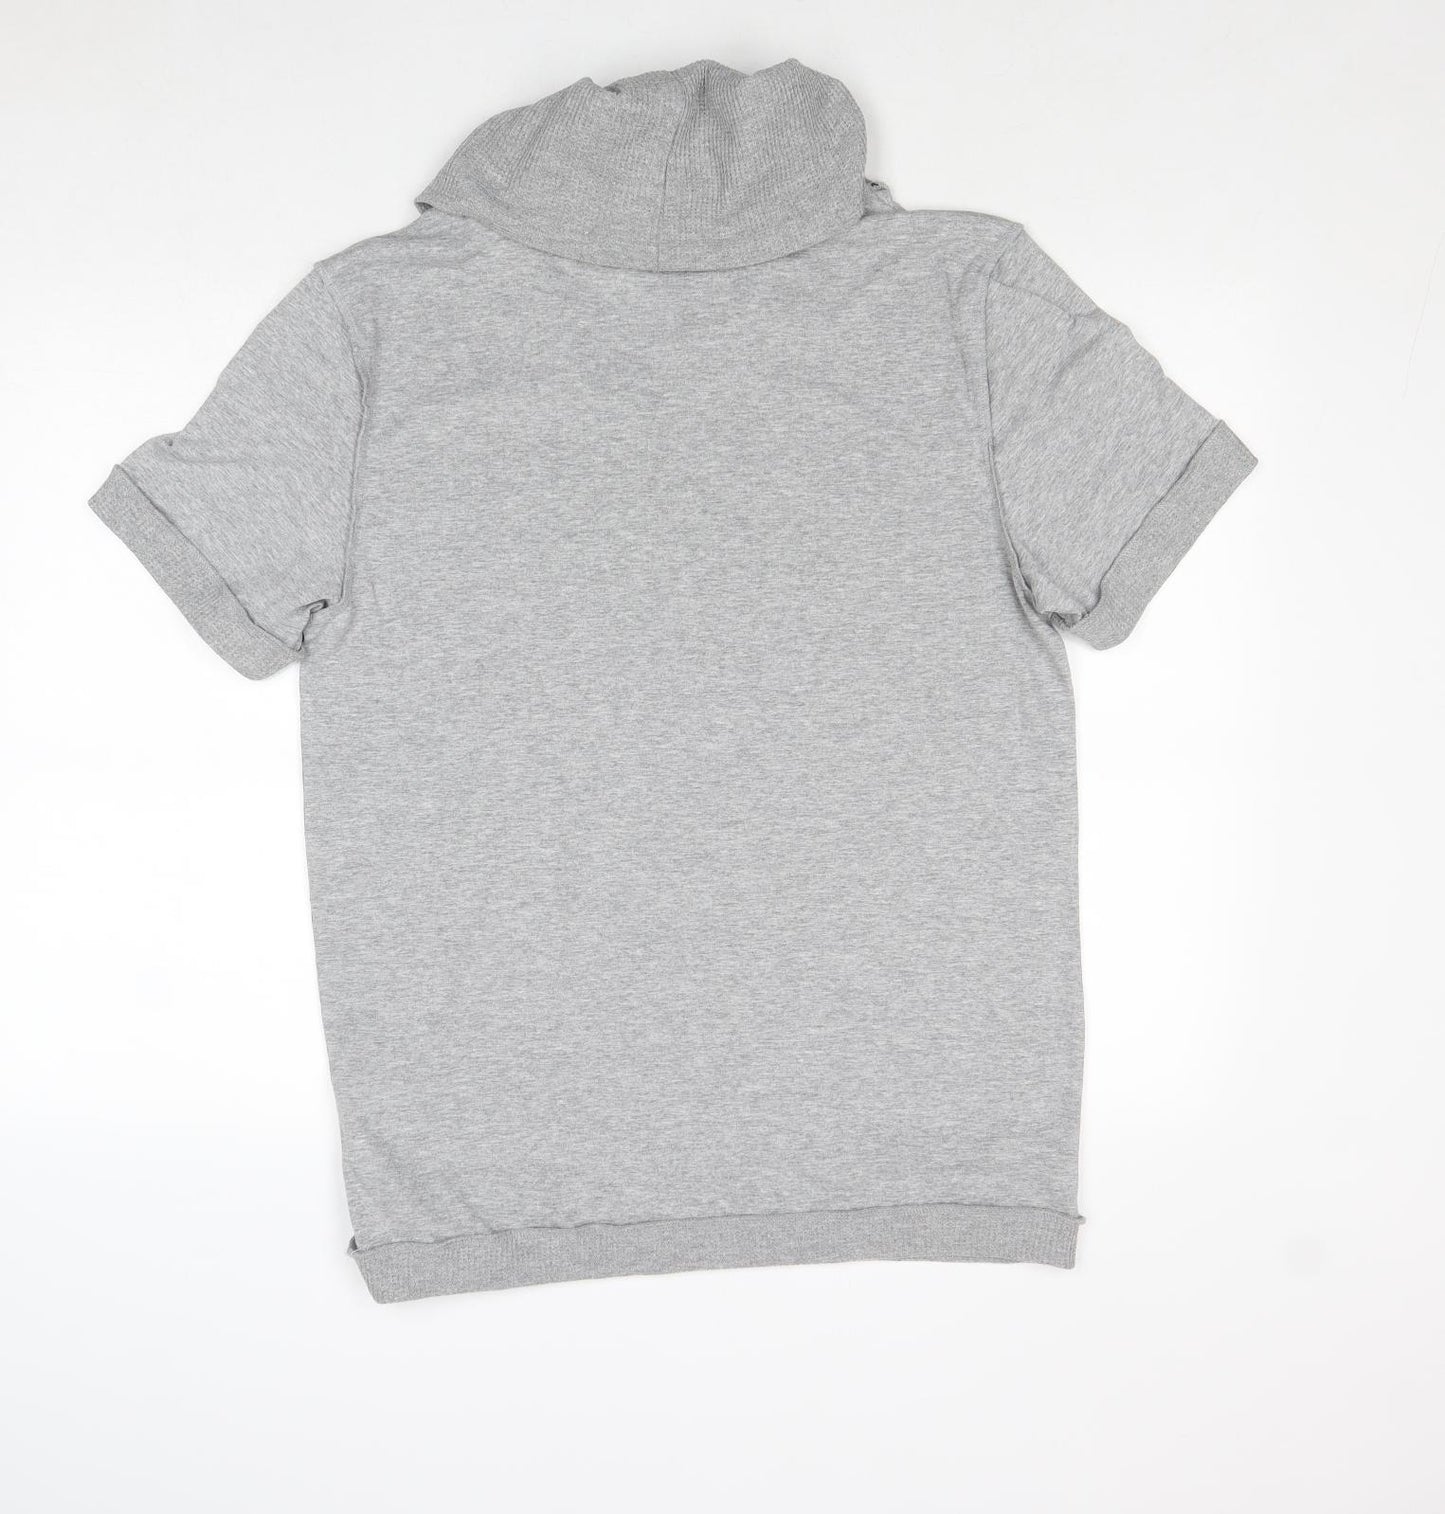 New Look Mens Grey Polyester T-Shirt Size L Roll Neck